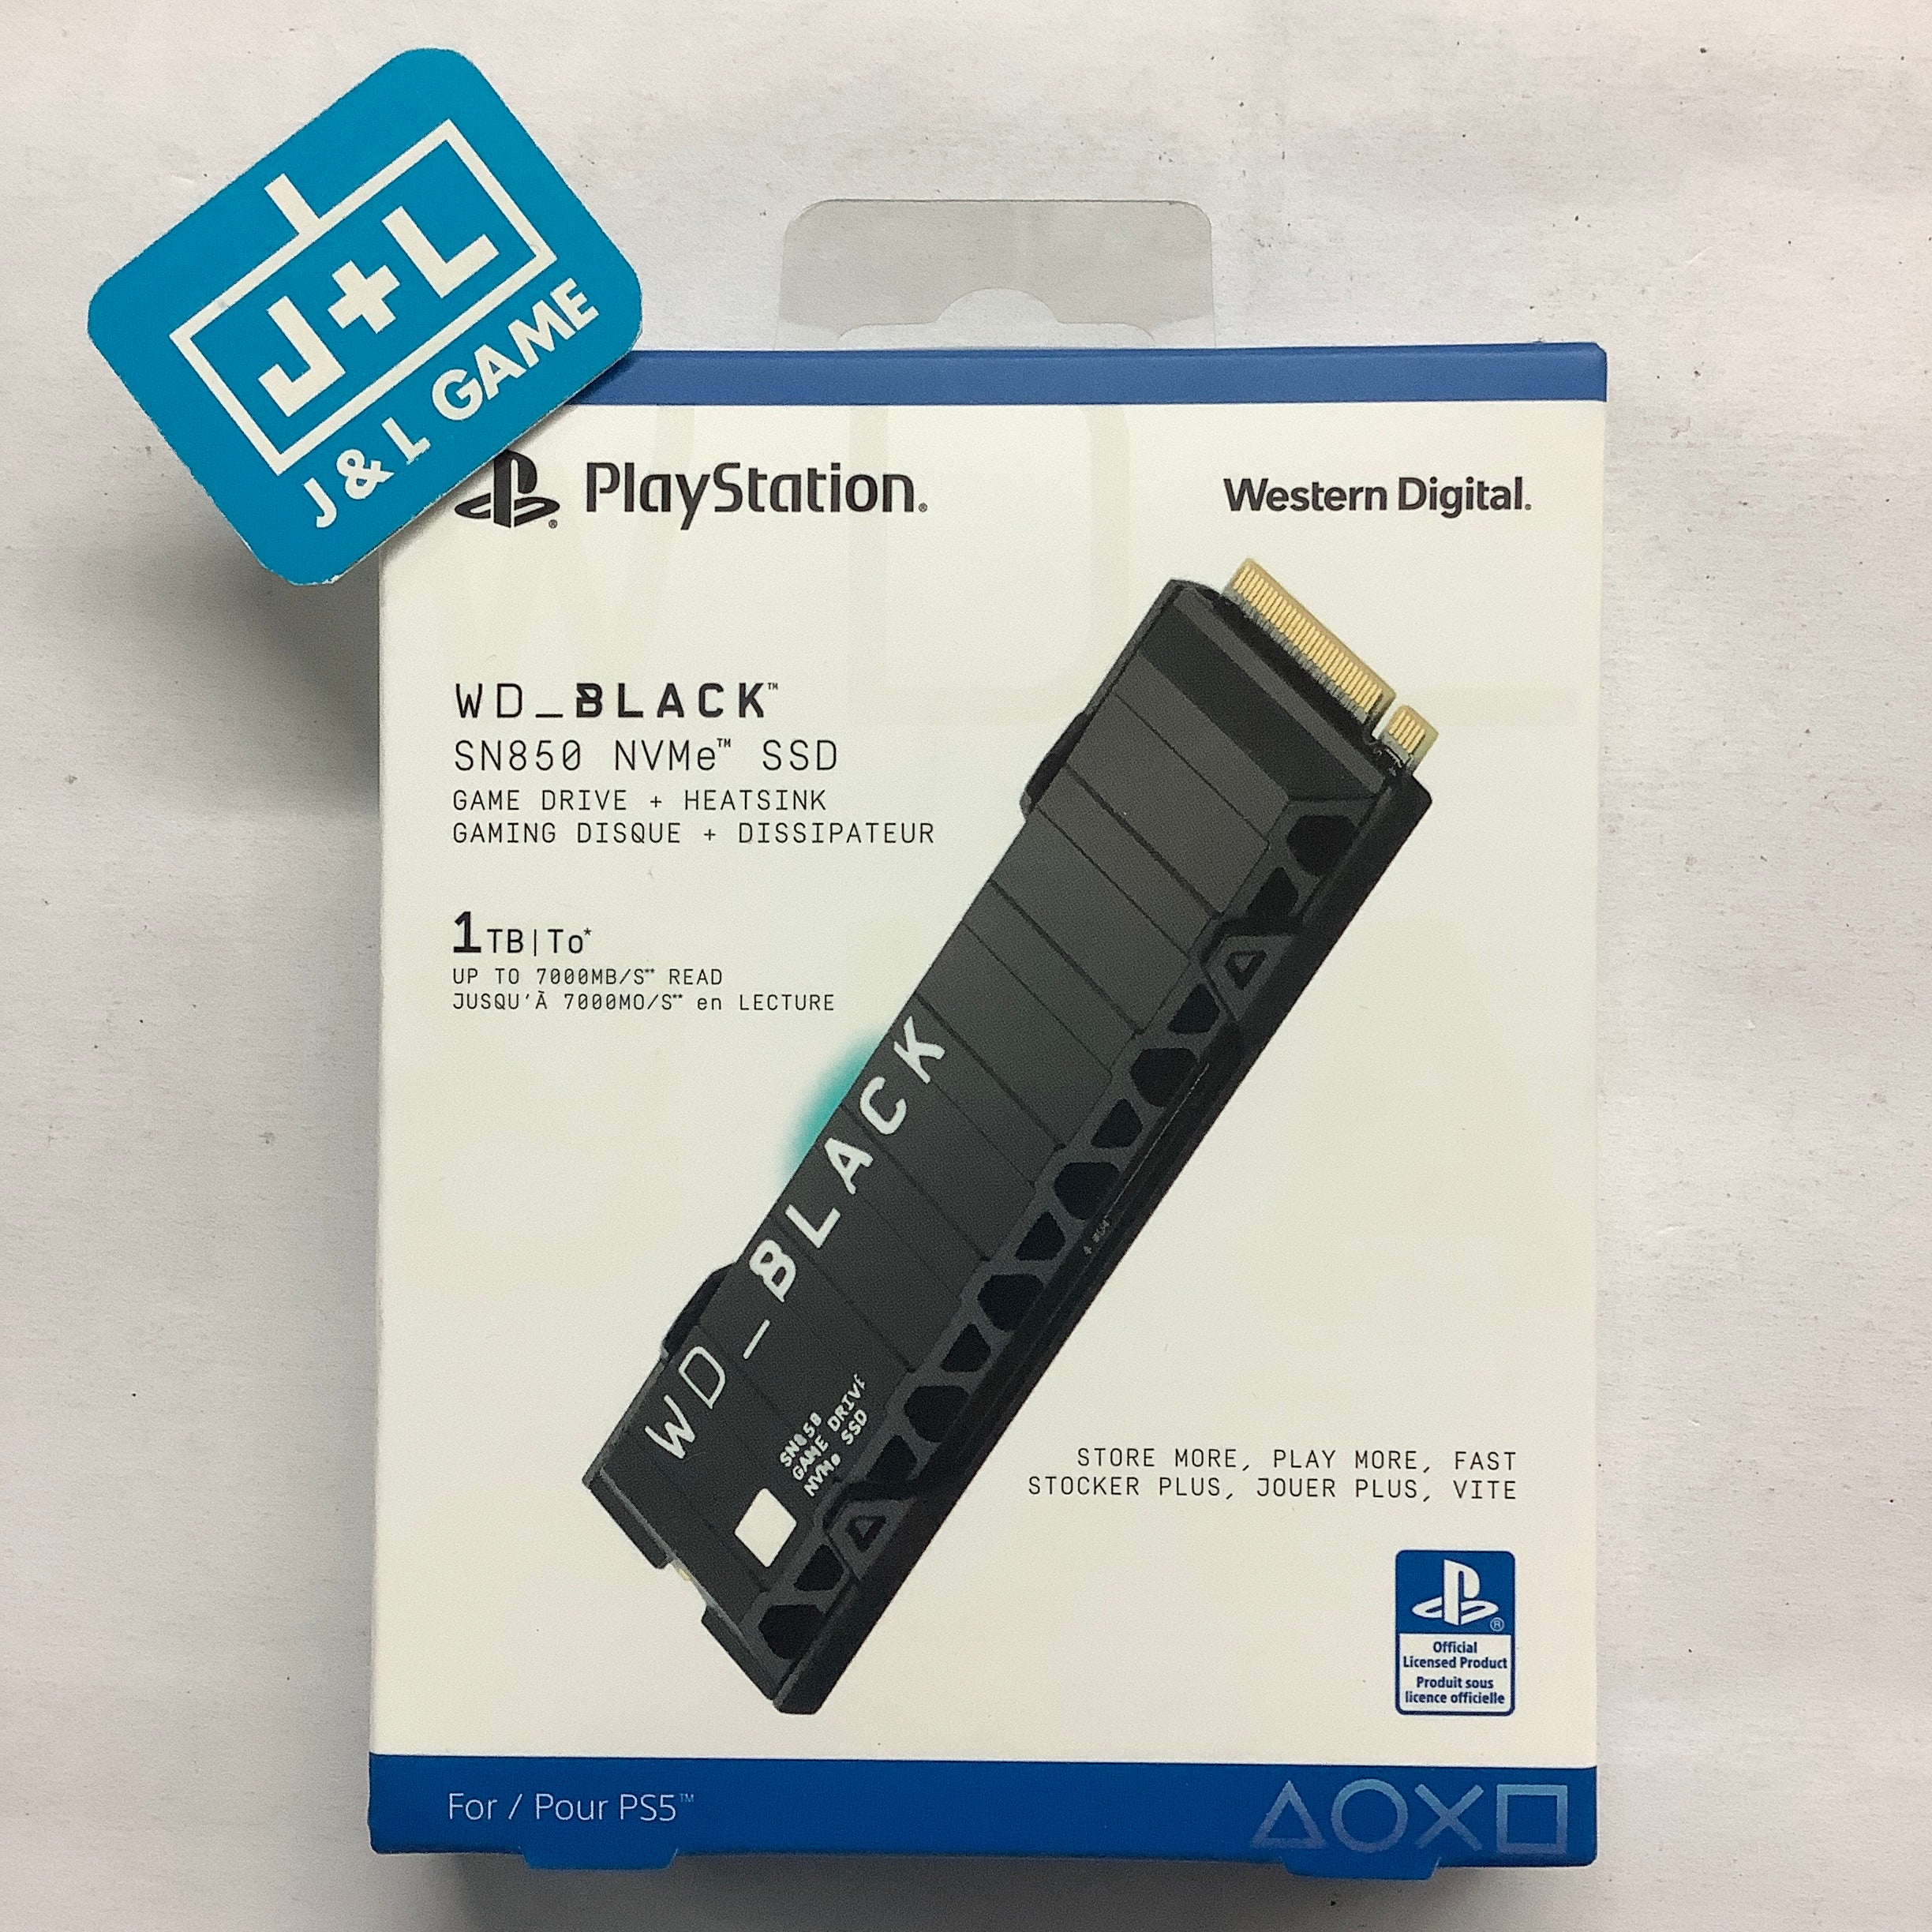 WD_BLACK 1TB SN850 NVMe SSD Solid State Drive with Heatsink Up to 7,000 MB/s - WDBBKW0010BBK - (PS5) PlayStation 5 Accessories Western Digital   